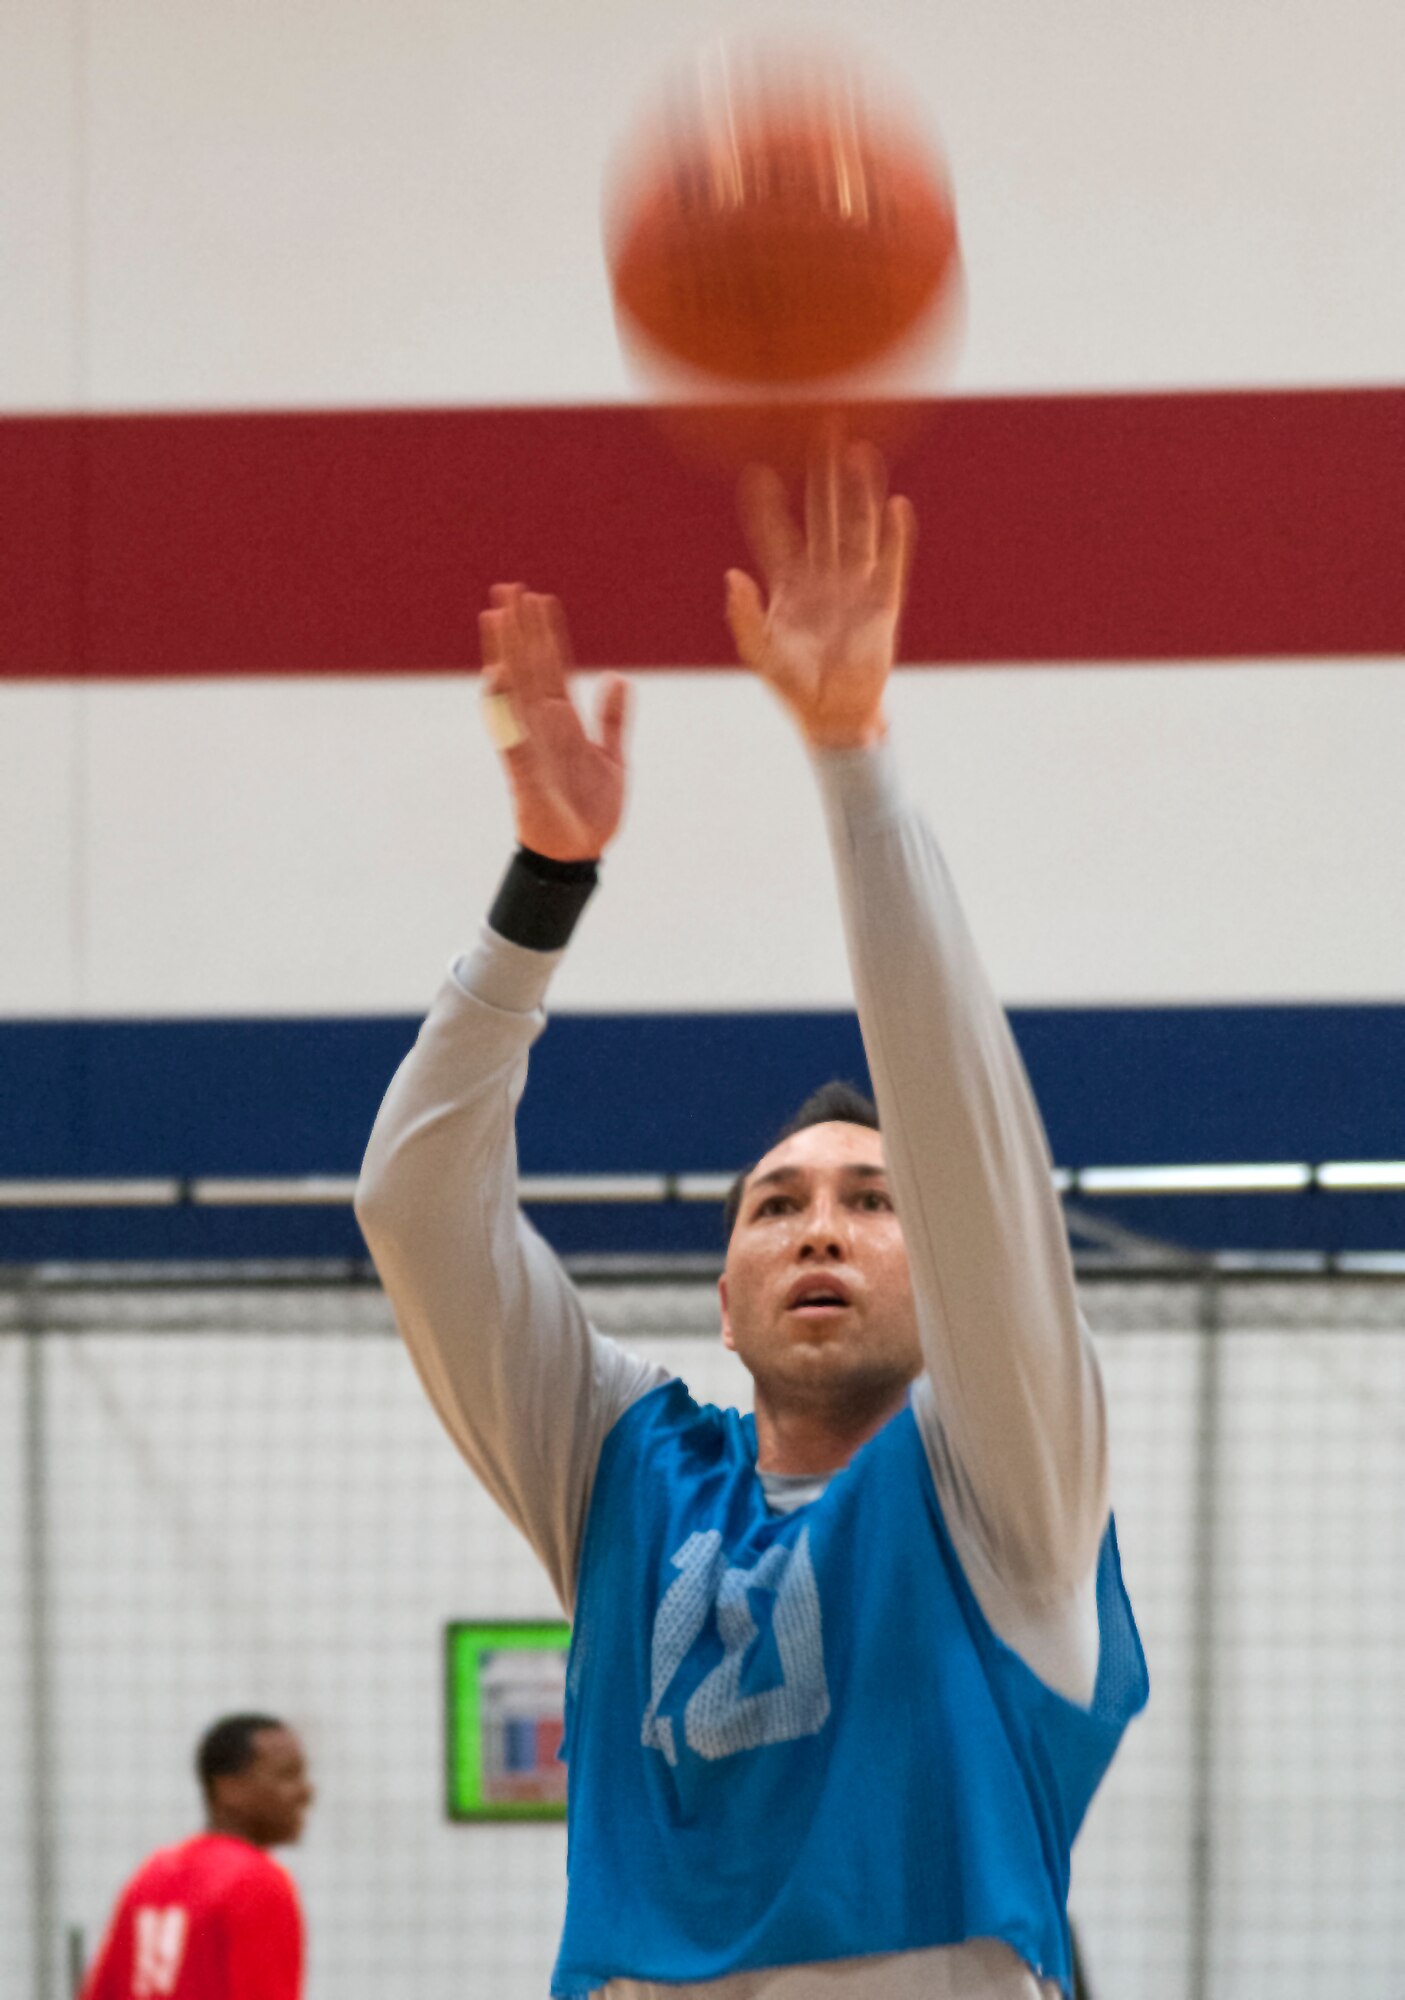 David Rivera, 90th Force Support Squadron, takes a free throw shot during an intramural basketball game Jan. 26, 2016, on F.E. Warren Air Force Base, Wyo. Rivera made the shot. (U.S. Air Force photo by Senior Airman Jason Wiese)